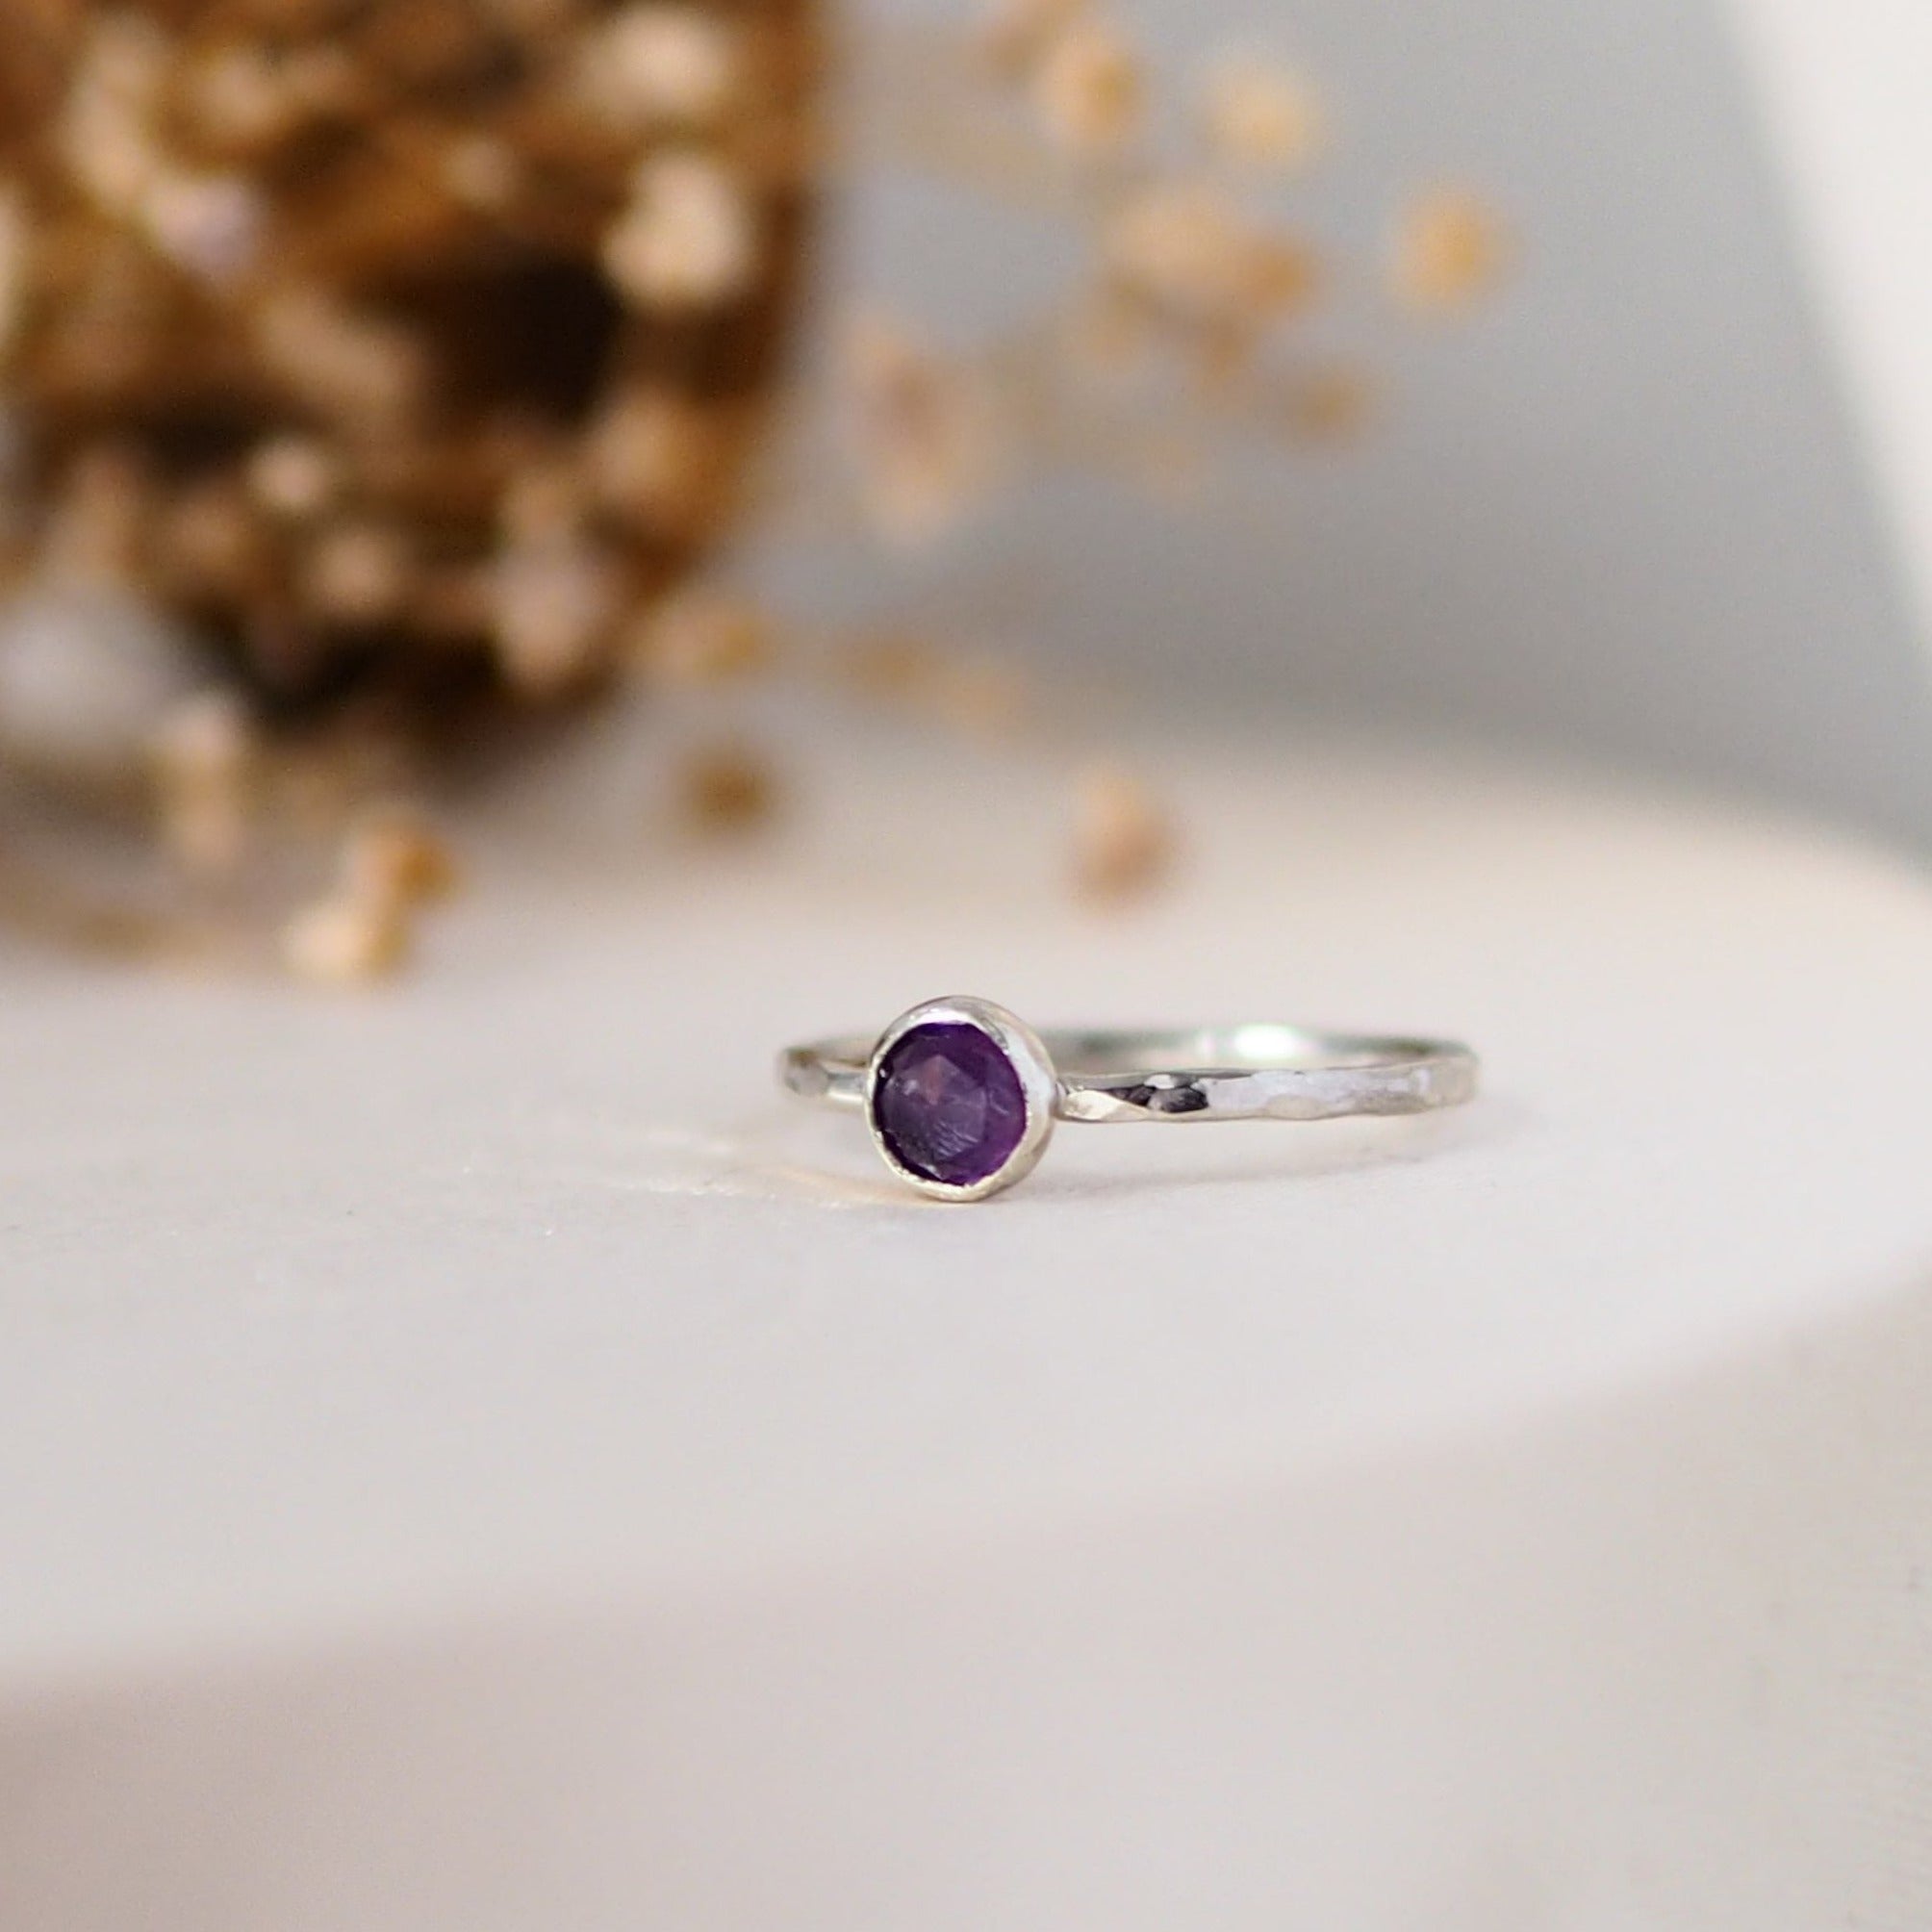 Amethyst Rosecut Hammered Sterling Silver Stacking Ring Lunar Moth Jewellery purple, large, stone, lavender amethyst, gemstone, celtic jewellery, purple amethyst, gemstone ring, birthstone jewellery